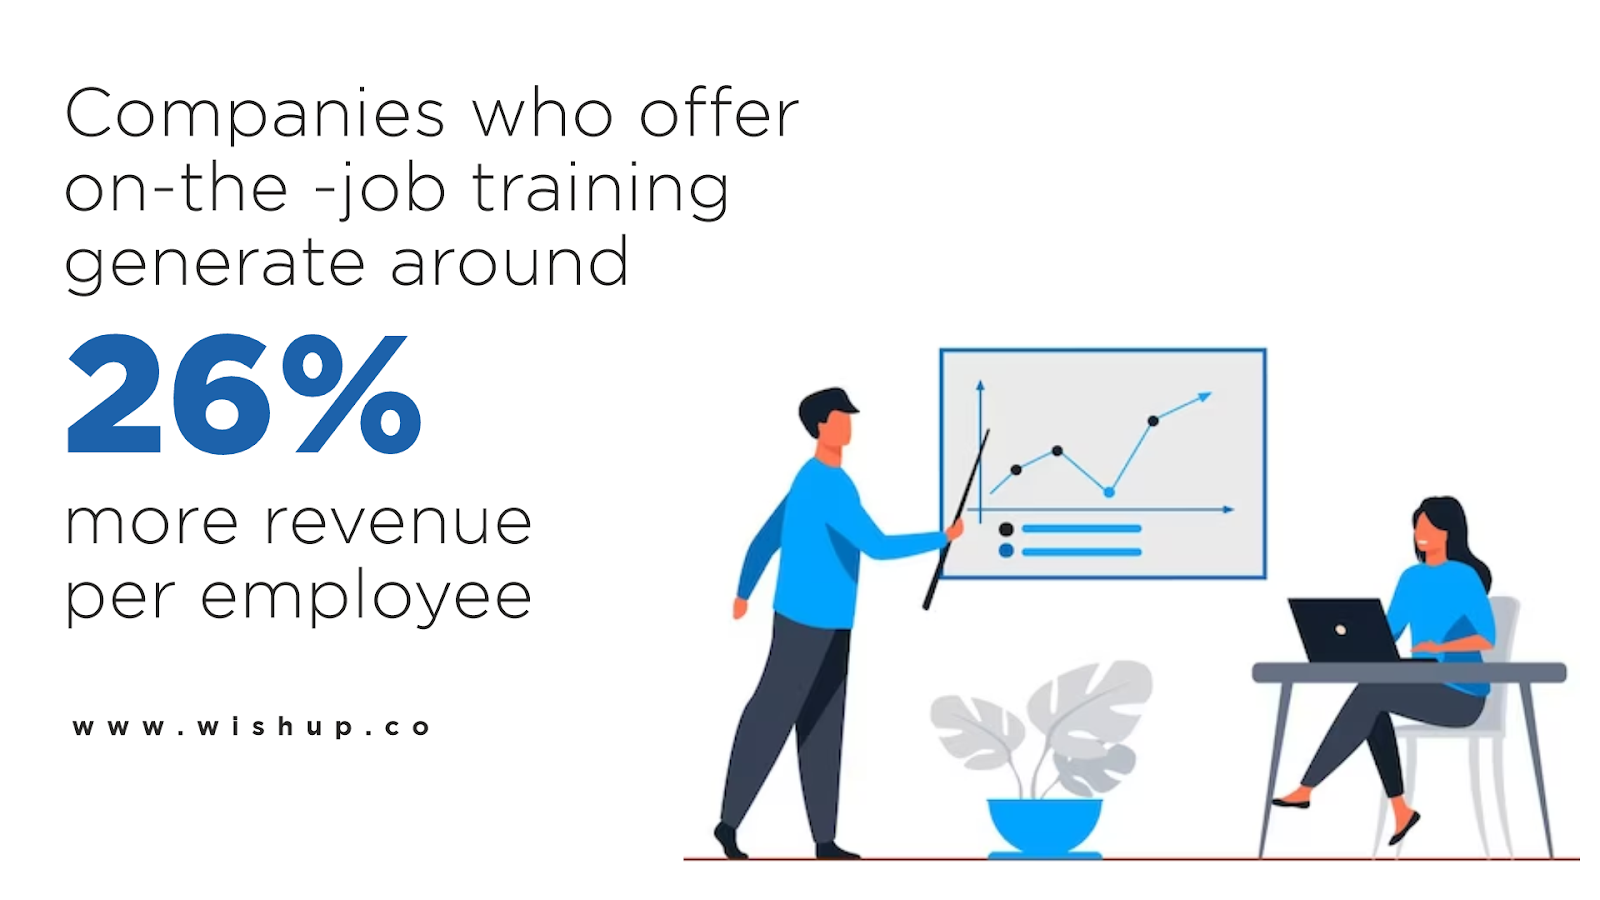 Infographic showing how valuable training is to produce more revenue